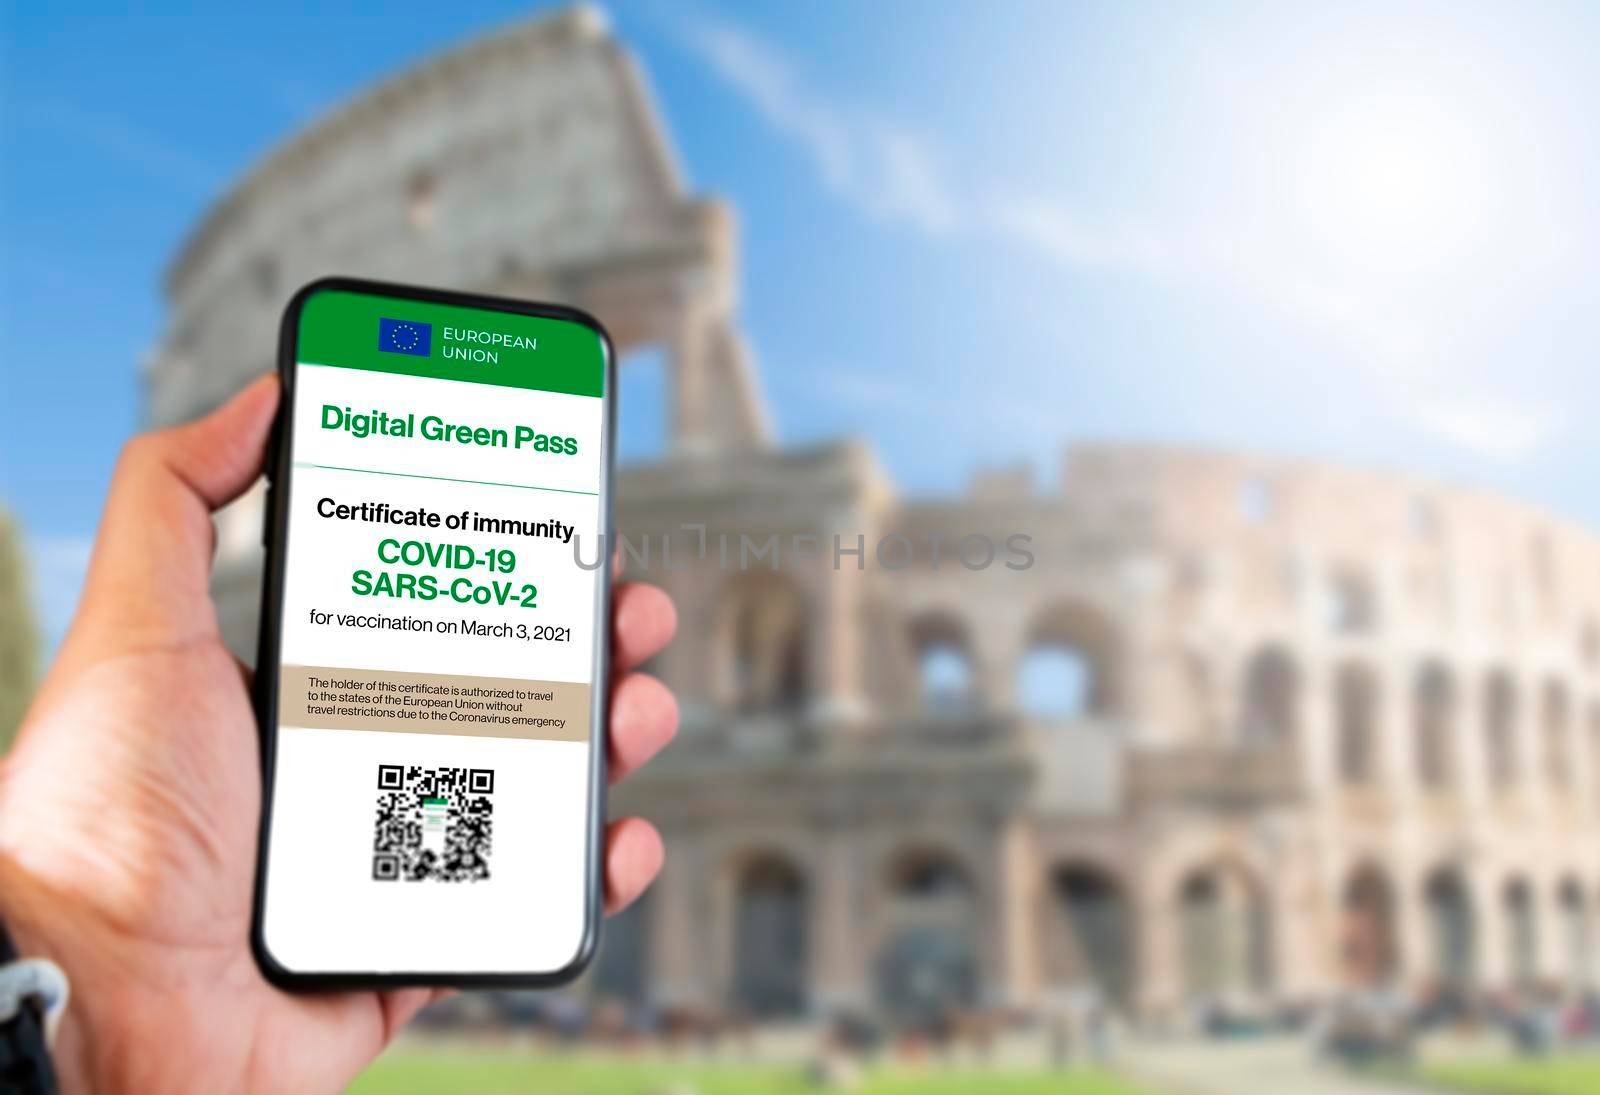 The digital green pass of the european union with the QR code on the screen of a mobile held by a hand with a blurred Colosseum in the background by rarrarorro